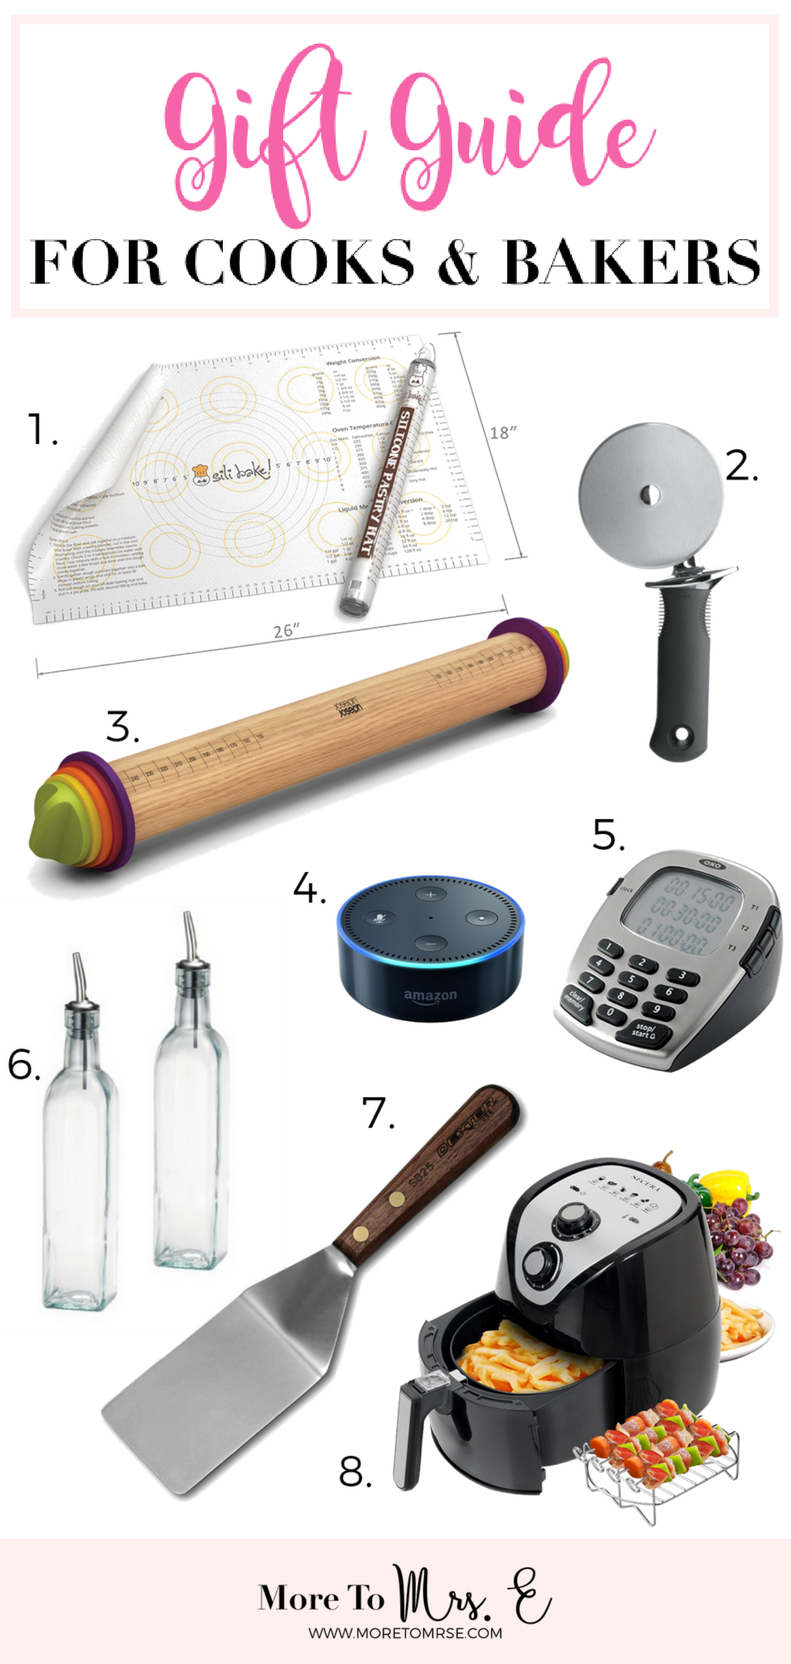 Gift guide for cooks and bakers_Christmas gift guide_Christmas ideas baker